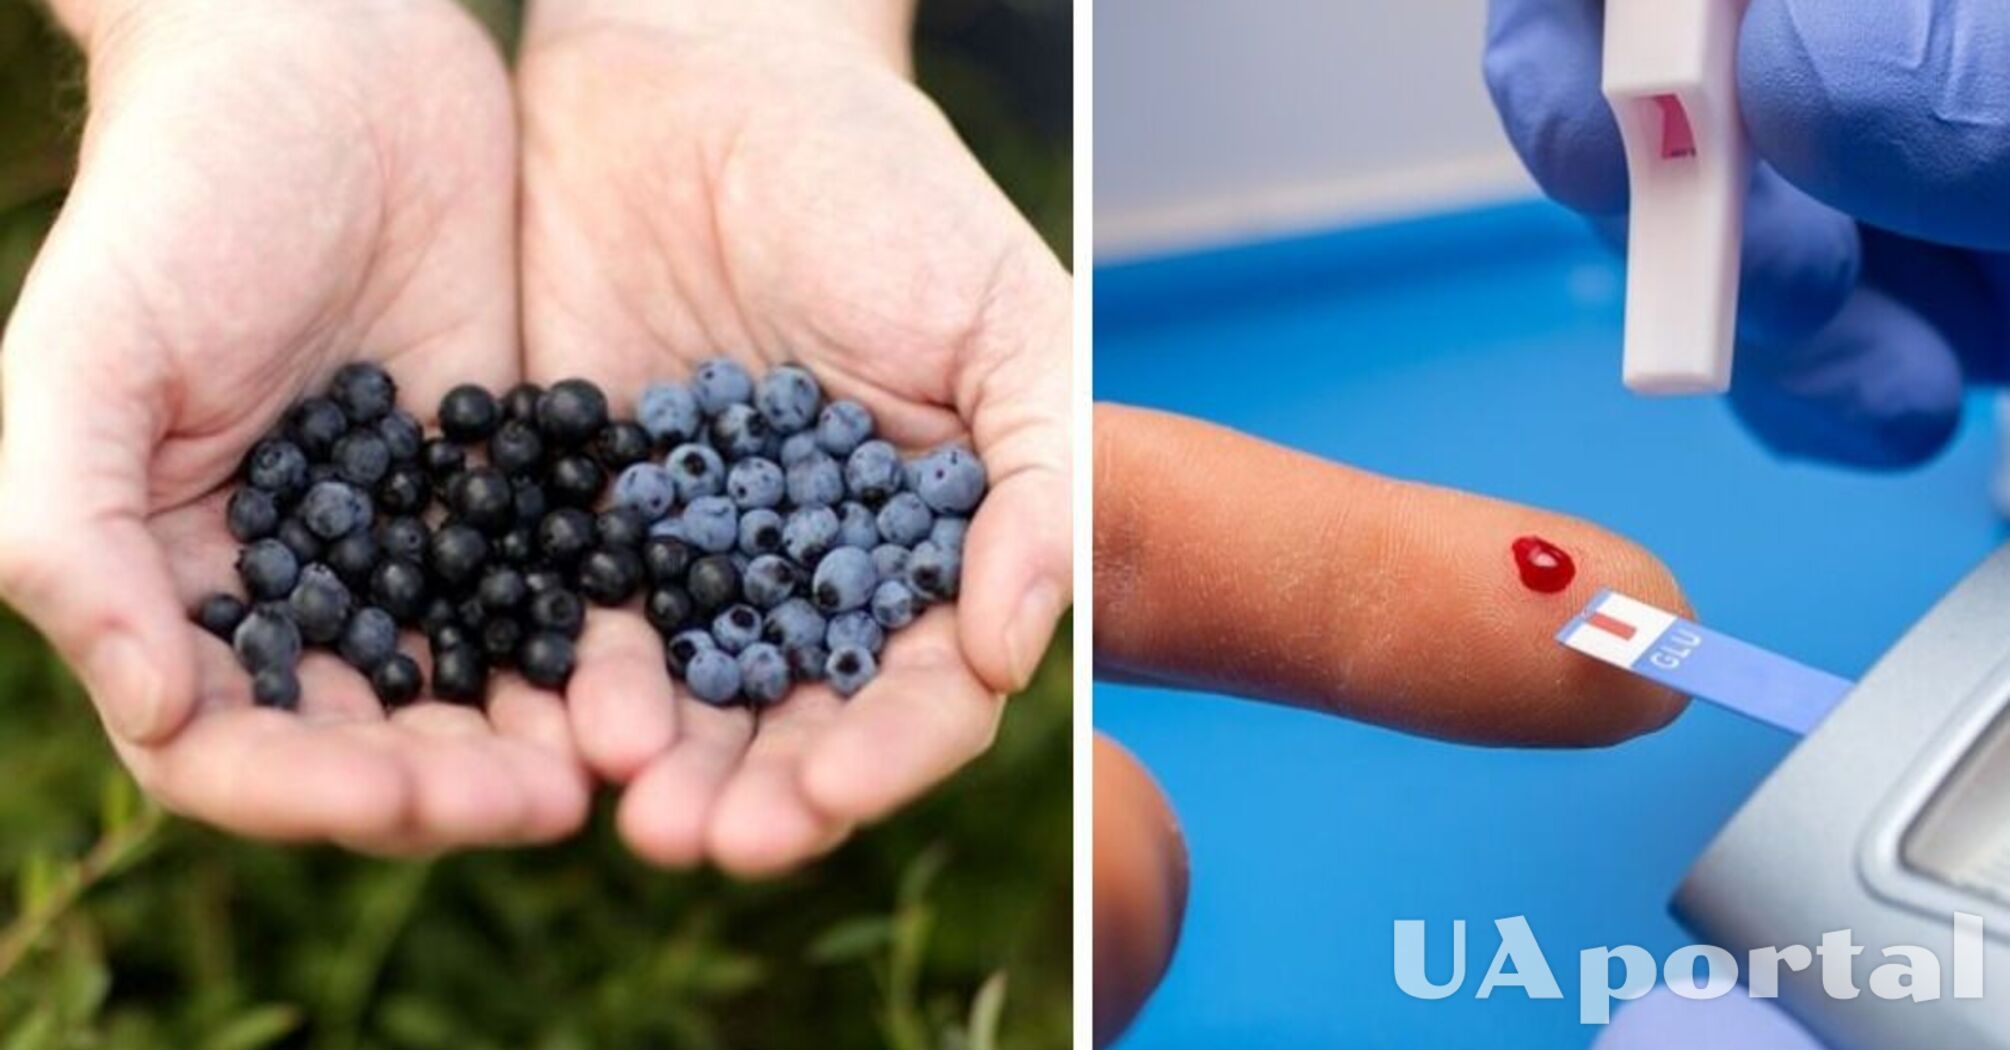 Lowers blood sugar: which berry nutritionists recommend for diabetics